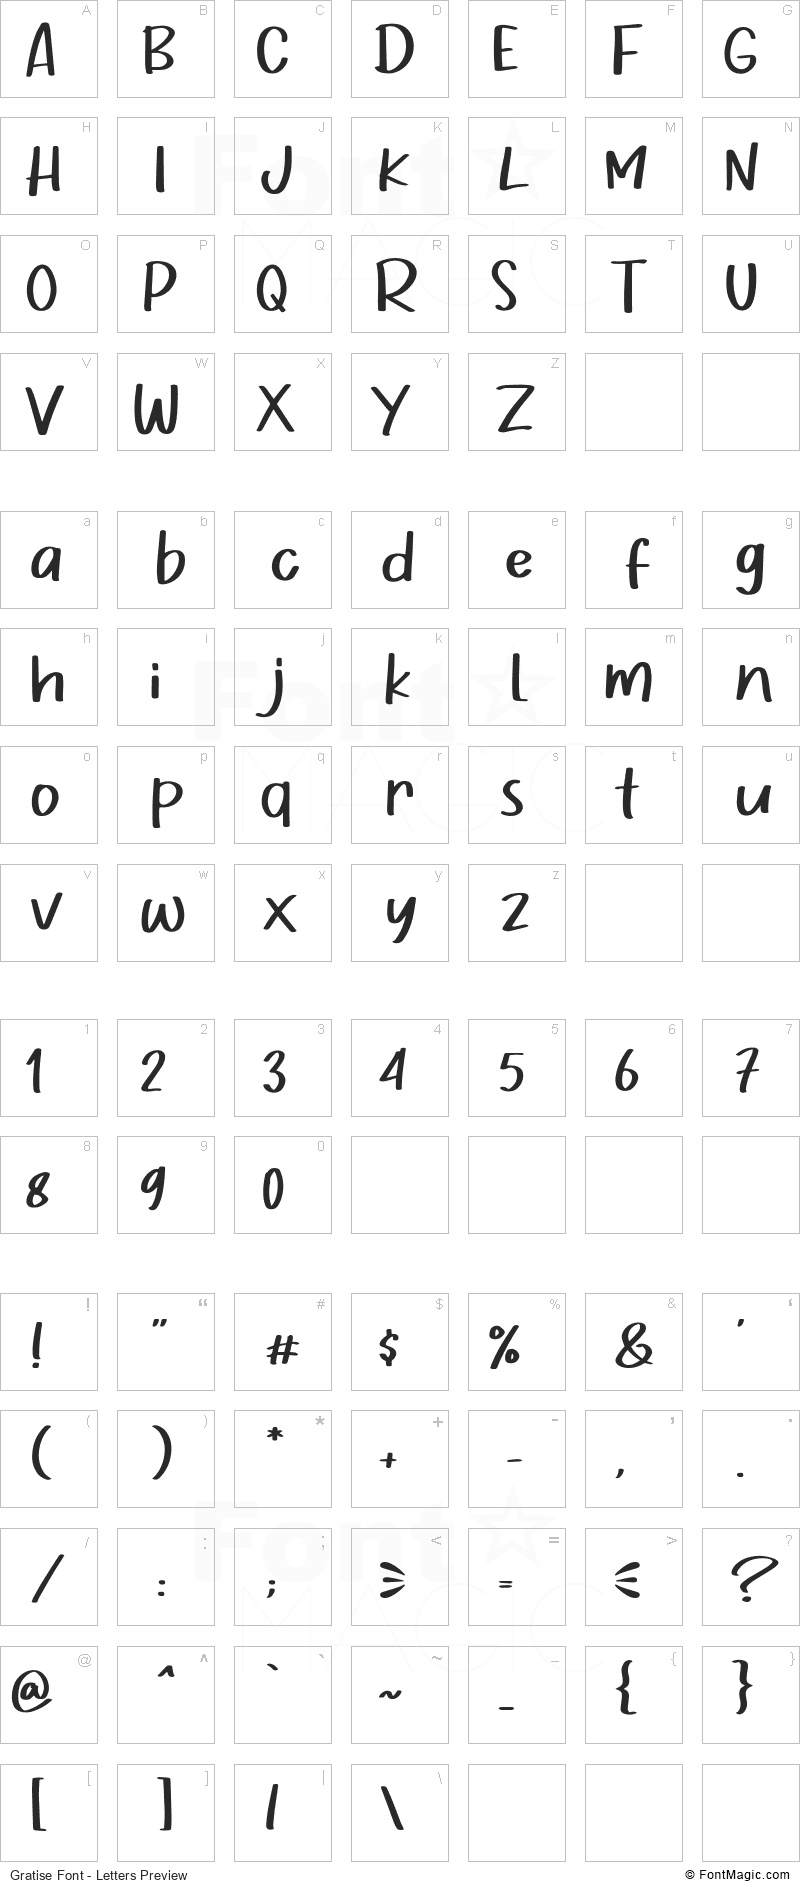 Gratise Font - All Latters Preview Chart